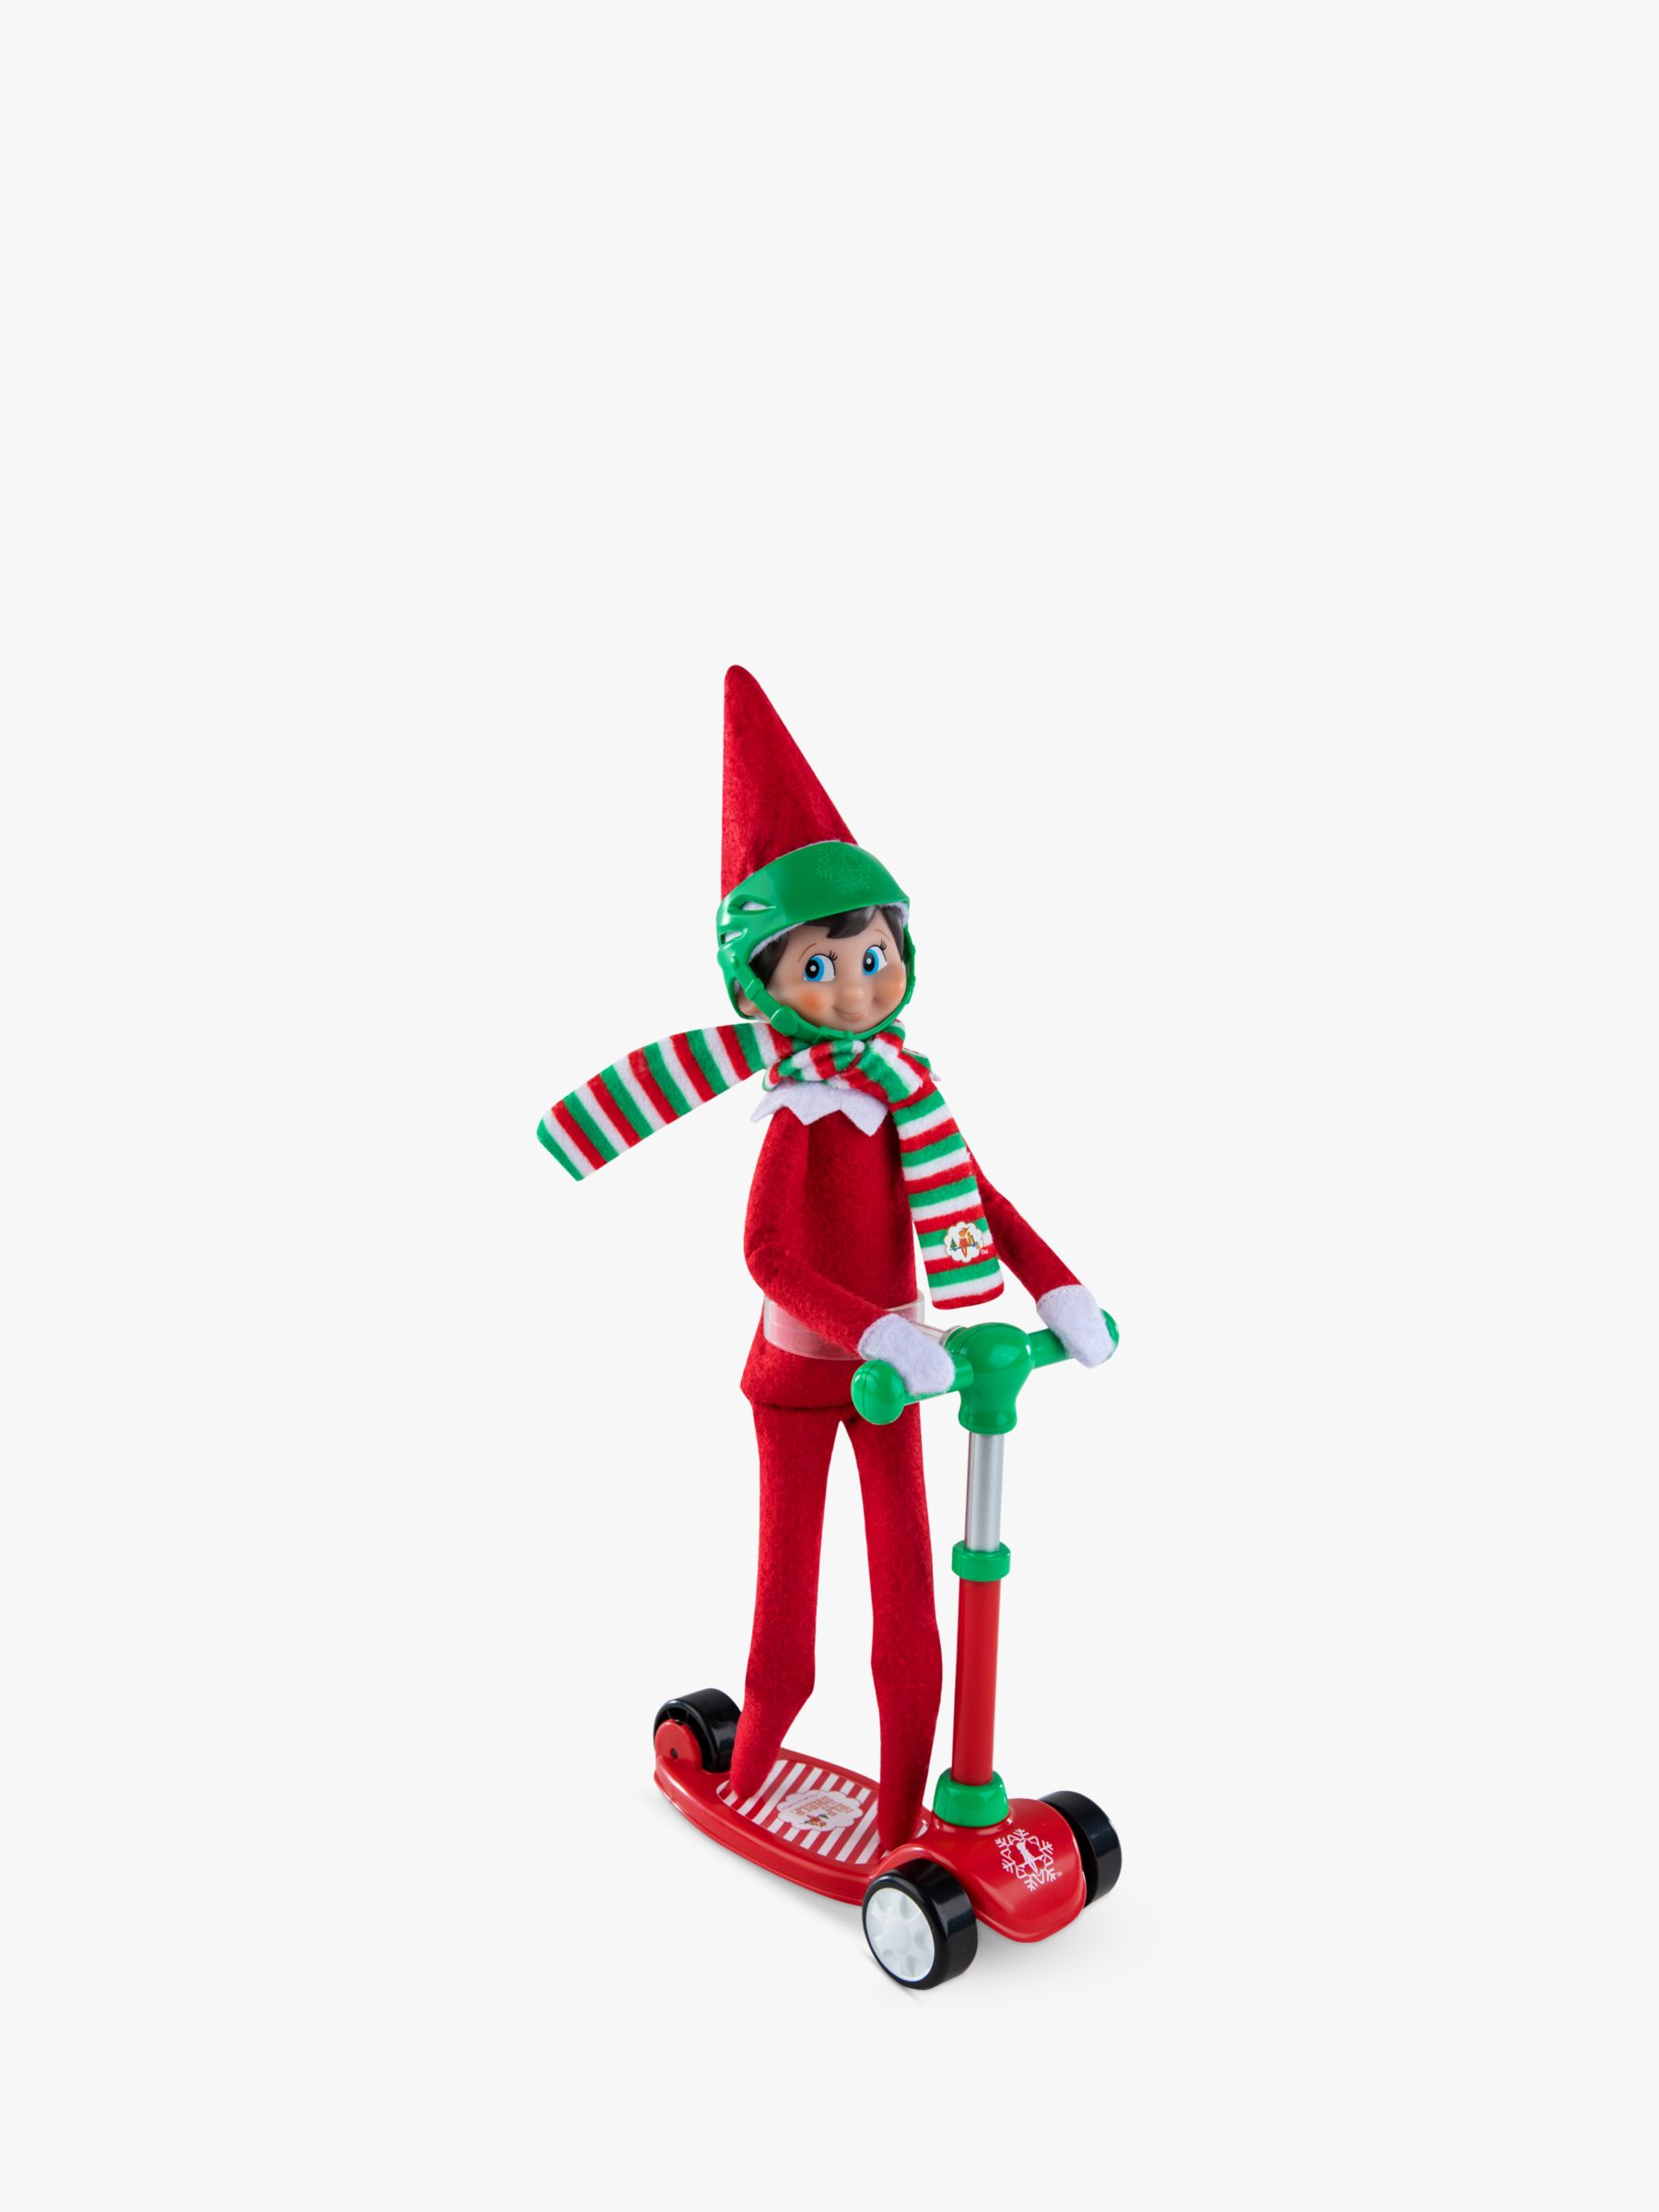 The Elf on the Shelf Scout Elves at Play Stand-n-Scoot